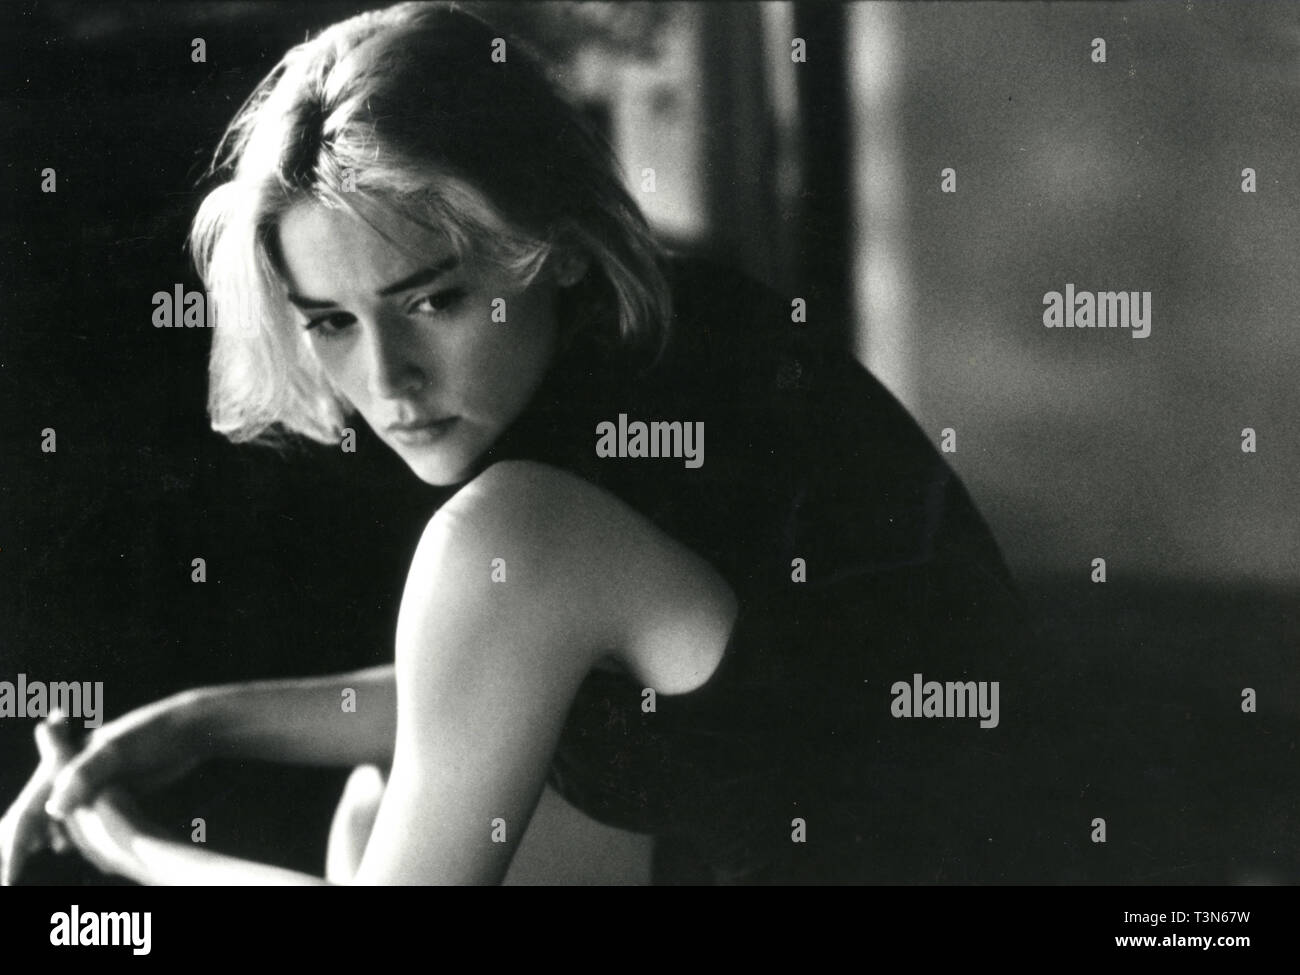 Actress Sharon Stone in the movie Sliver, 1993 Stock Photo